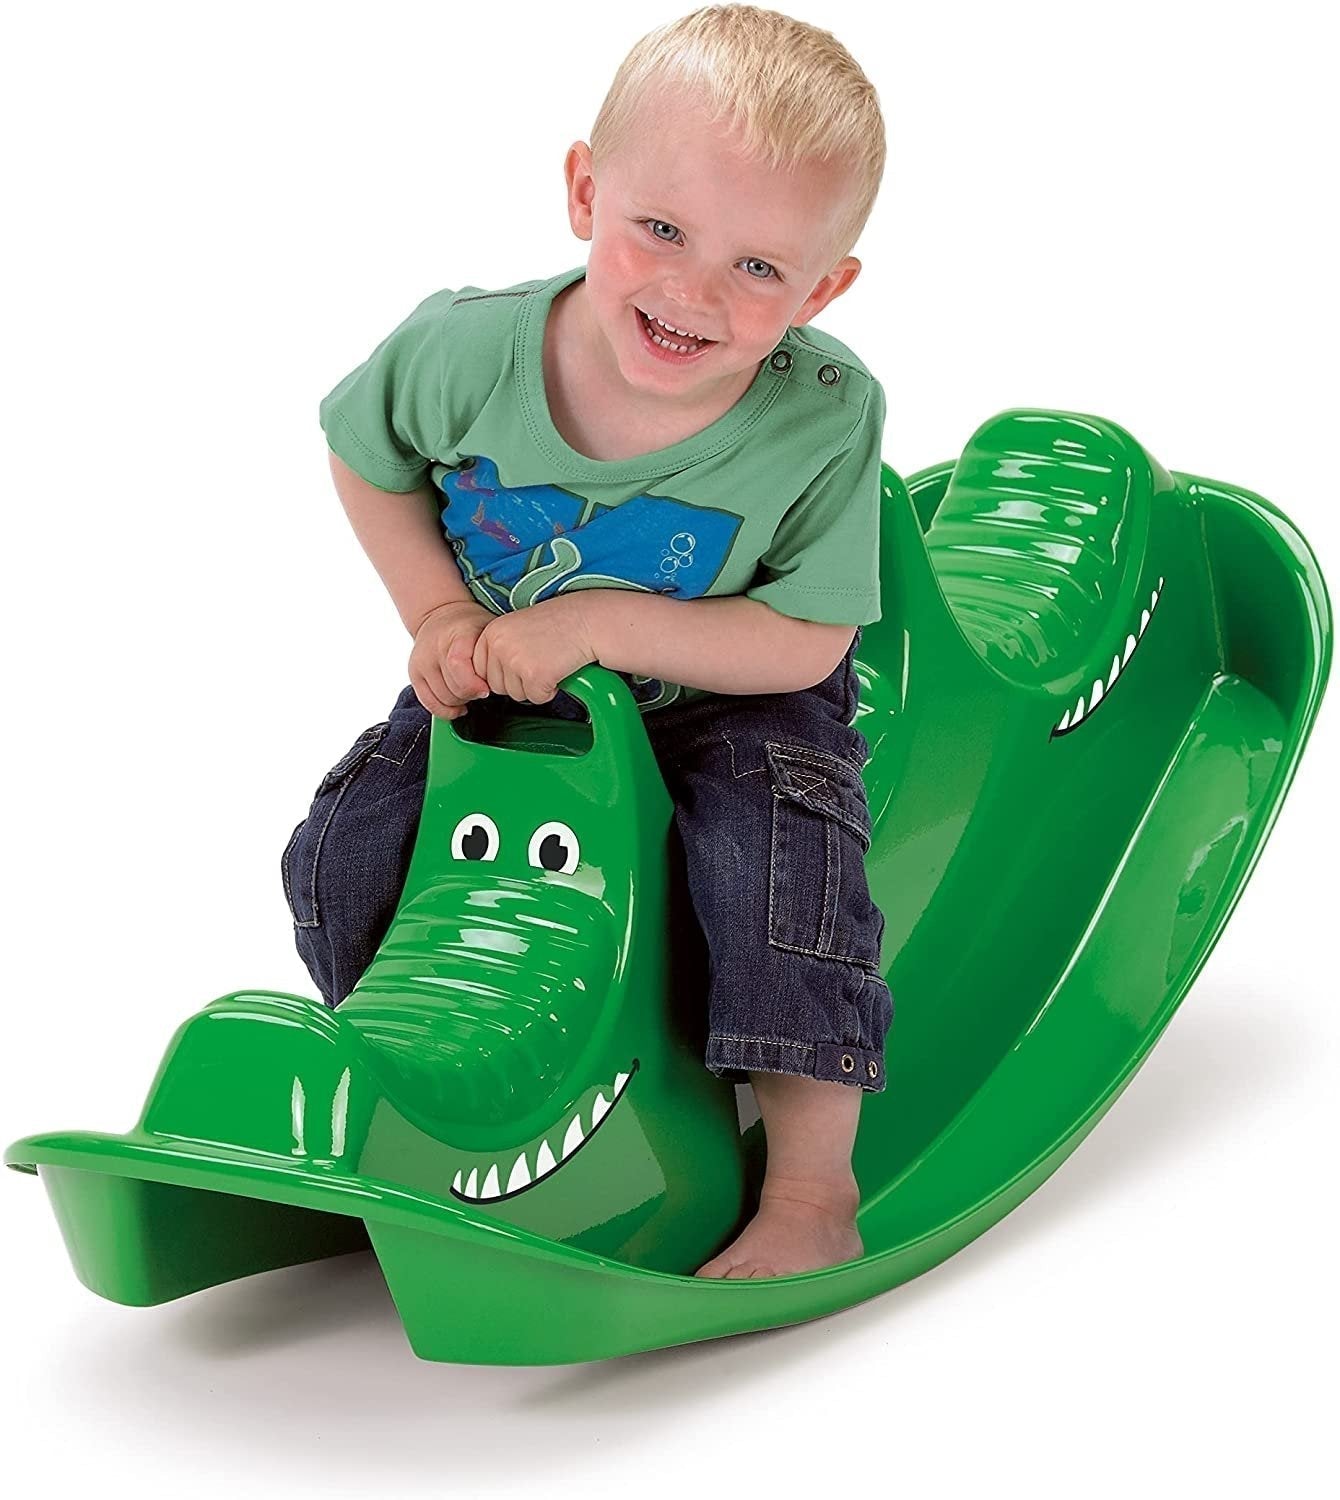 3 Persons Rocker and Seesaw - Crocodile, The 3 Persons Rocker and Seesaw helps children develop their balance skills with these brightly coloured animal seesaws. Kids will have a rocking time on this 3 Persons Rocker and Seesaw. Watch as they hold tight and and rock to and fro. This cheerful 3 Persons Rocker and Seesaw promises to keep your kids amused for hours and will improve both their balance and coordination. Suitable for indoor and outdoor use. Very stable seesaw for 3 persons. The child that is sees